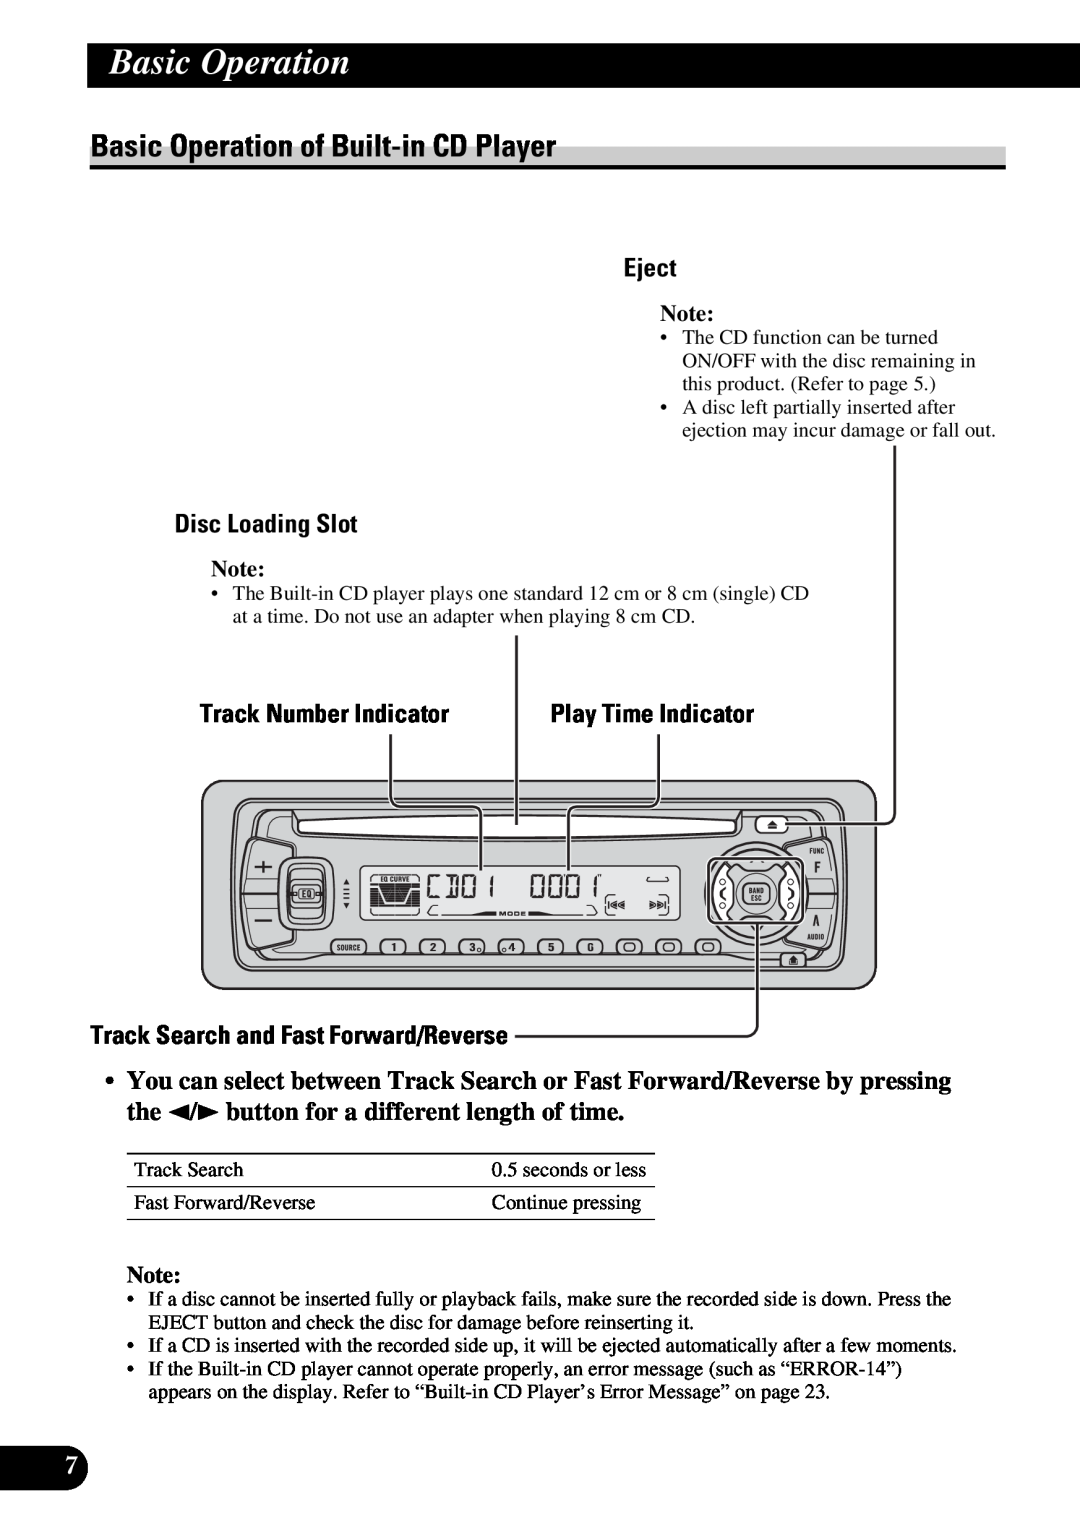 Pioneer DEH-3110 operation manual Basic Operation of Built-inCD Player, Eject, Disc Loading Slot, Track Number Indicator 